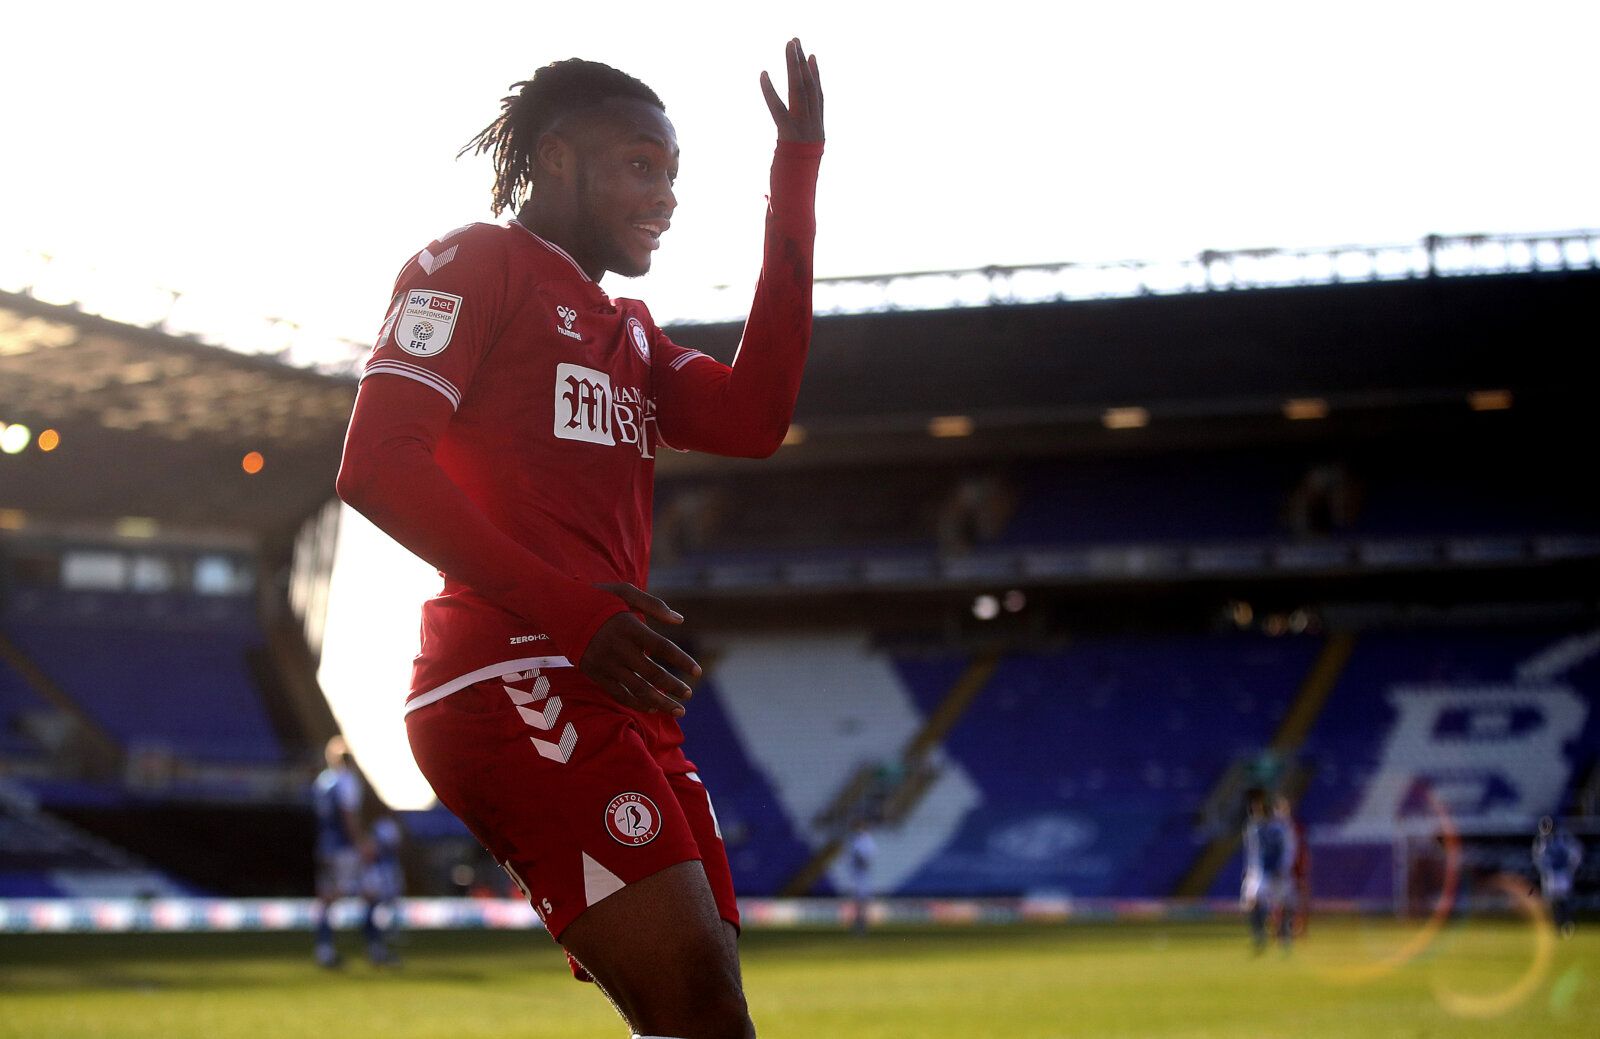 Soccer Football - Championship - Birmingham City v Bristol City - St Andrew's, Birmingham, Britain - March 13, 2021 Bristol City's Antoine Semenyo celebrates scoring their second goal Action Images/Carl Recine EDITORIAL USE ONLY. No use with unauthorized audio, video, data, fixture lists, club/league logos or 'live' services. Online in-match use limited to 75 images, no video emulation. No use in betting, games or single club /league/player publications.  Please contact your account representati